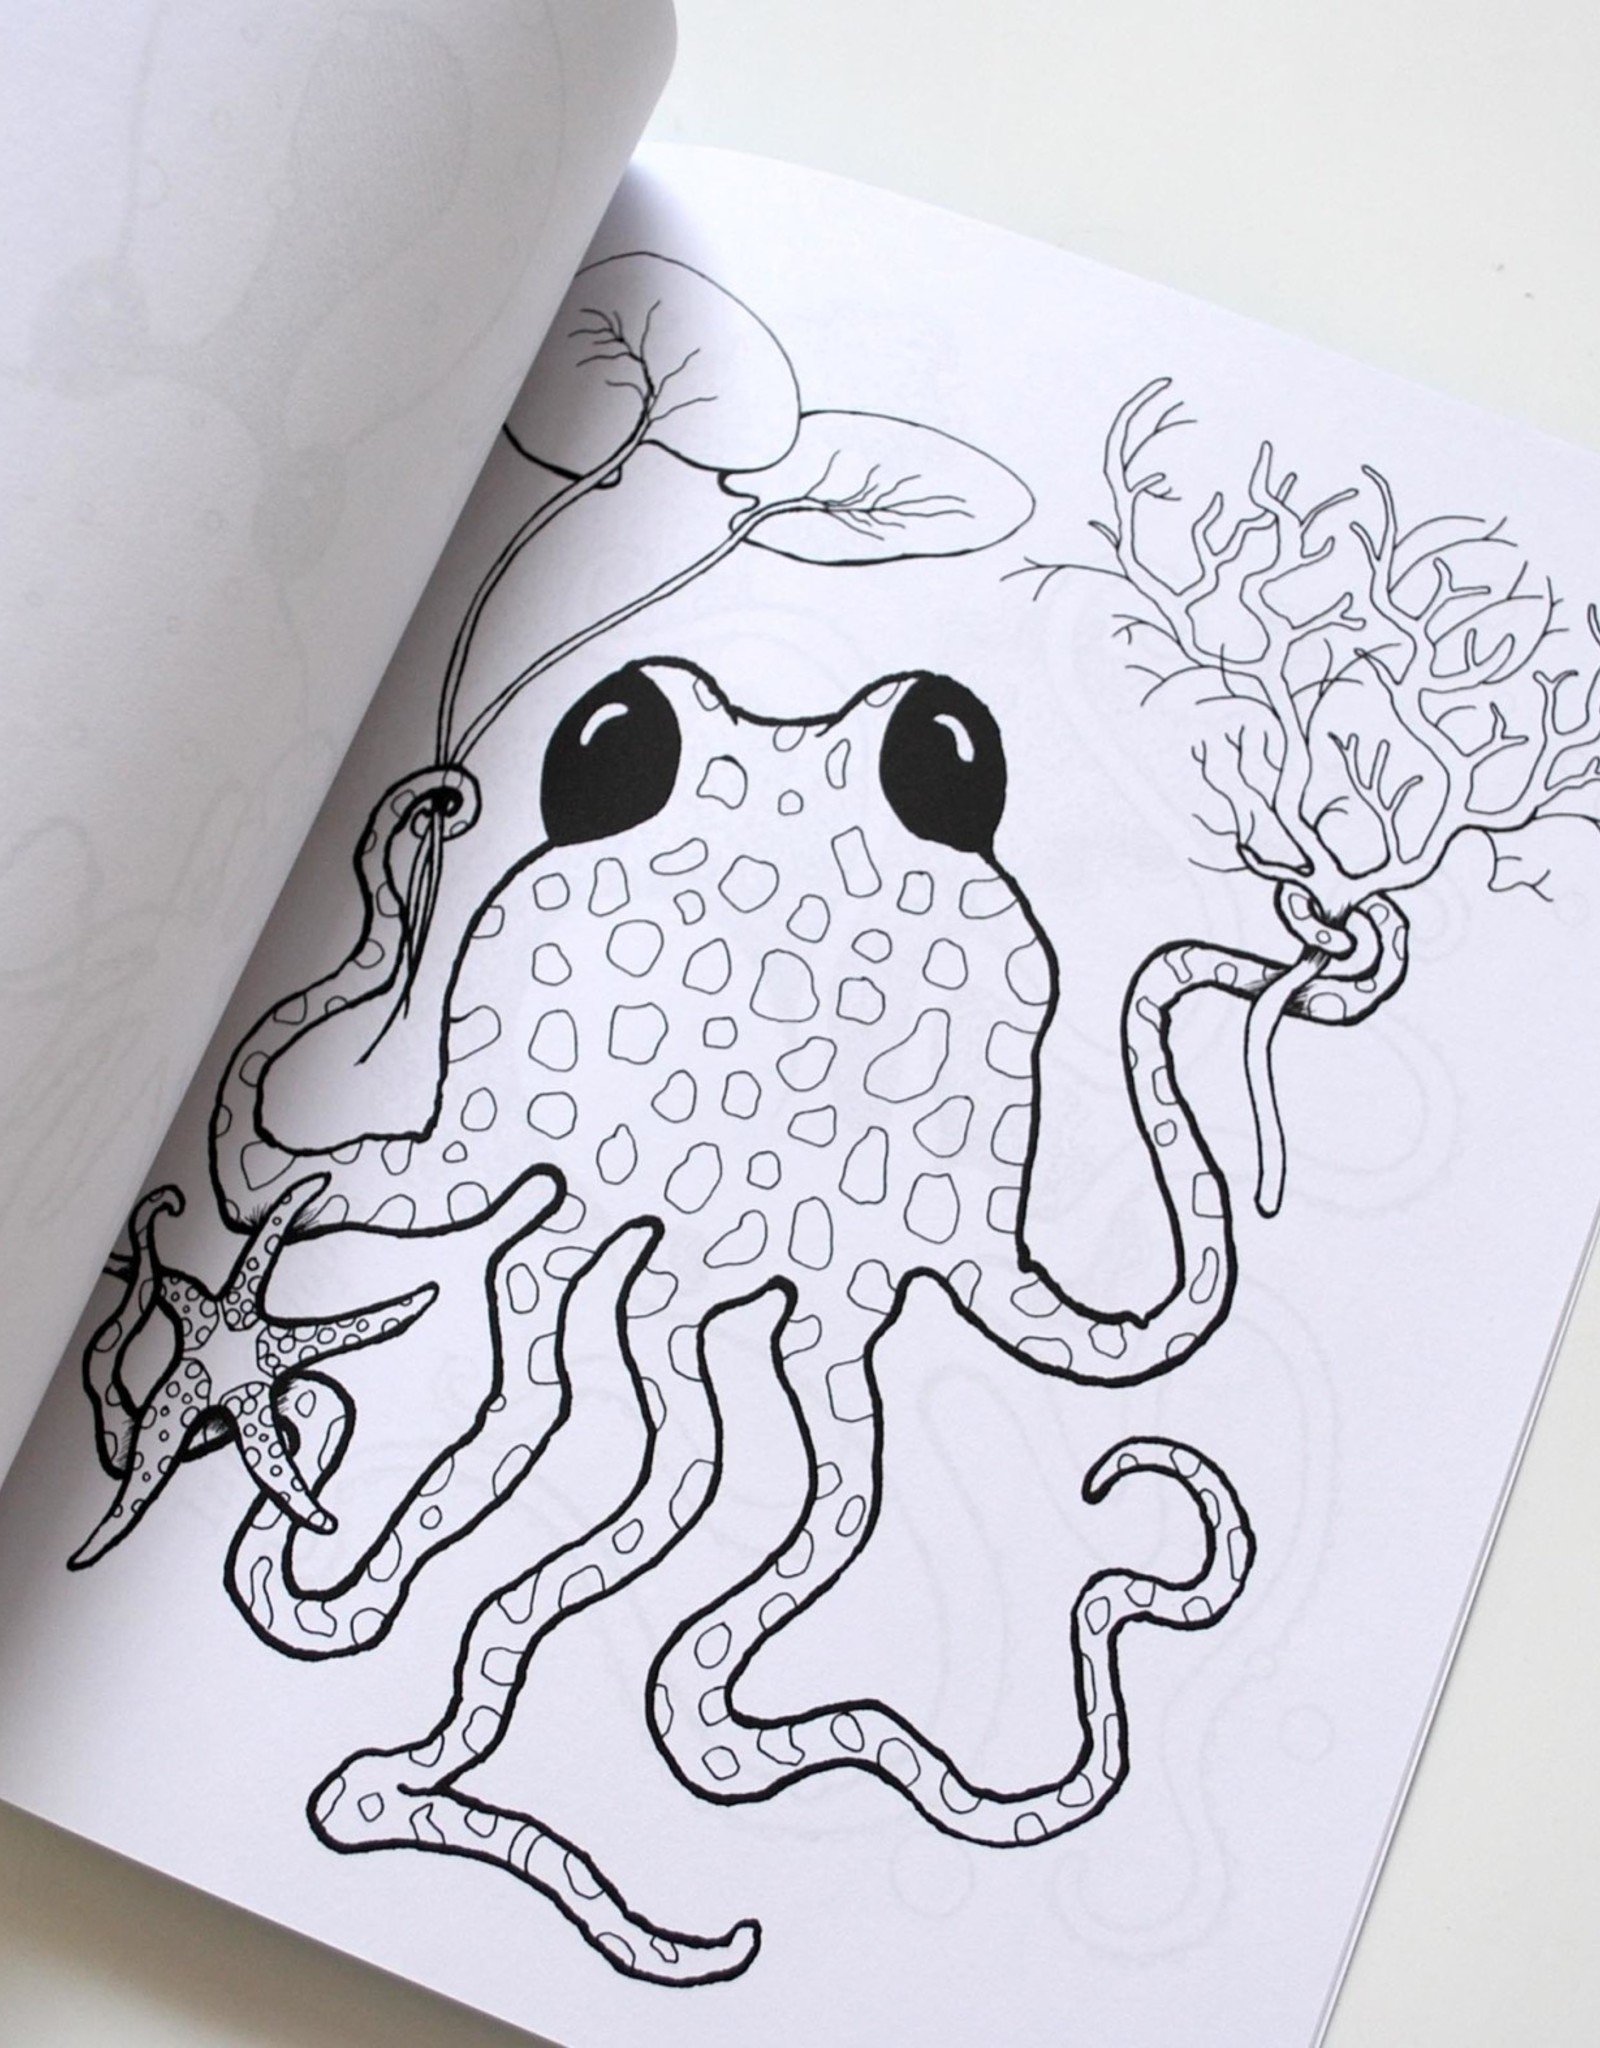 Melissa Rohr Gindling Octopus Coloring Book by Melissa Rohr Gindling